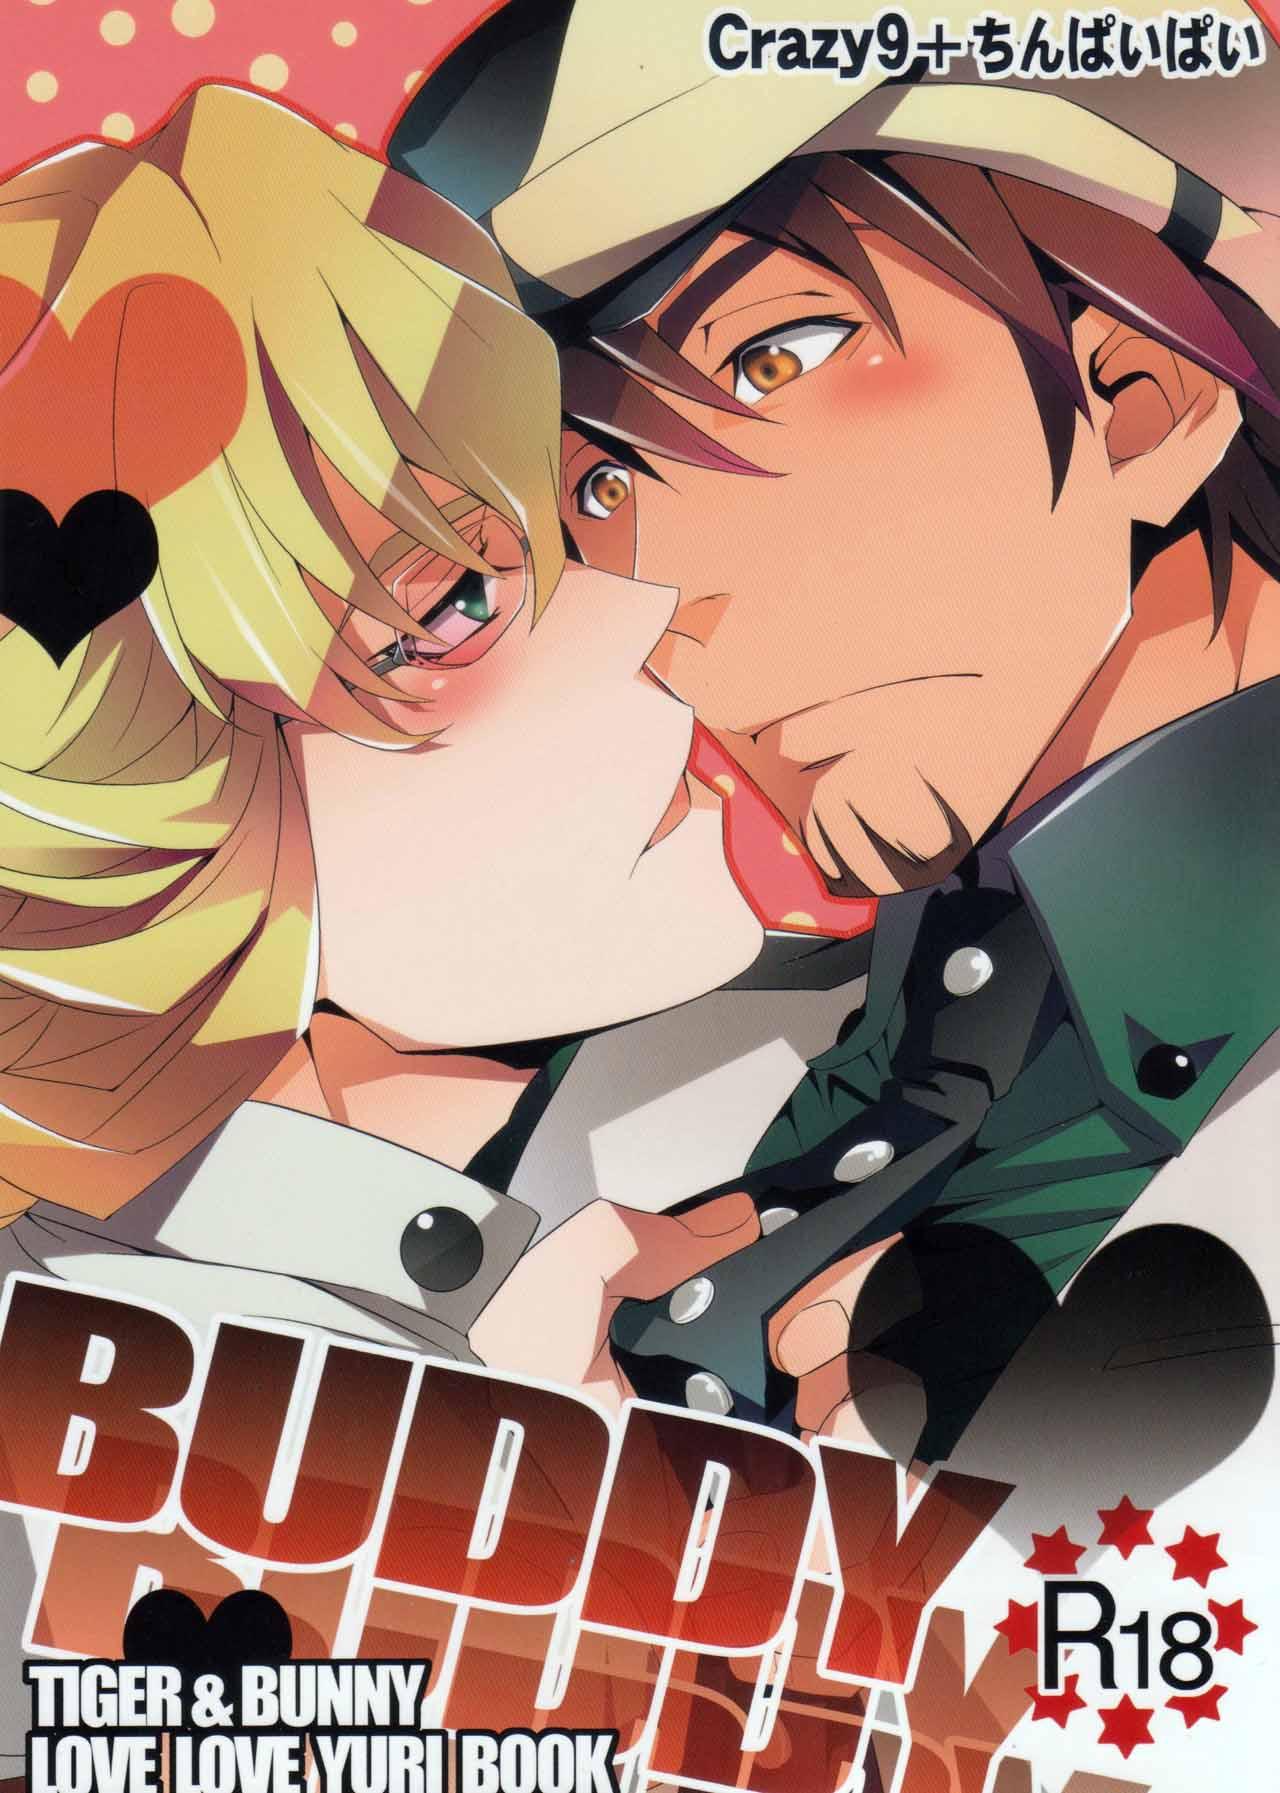 Gay Studs Buddy - Tiger and bunny Ex Girlfriends - Page 2